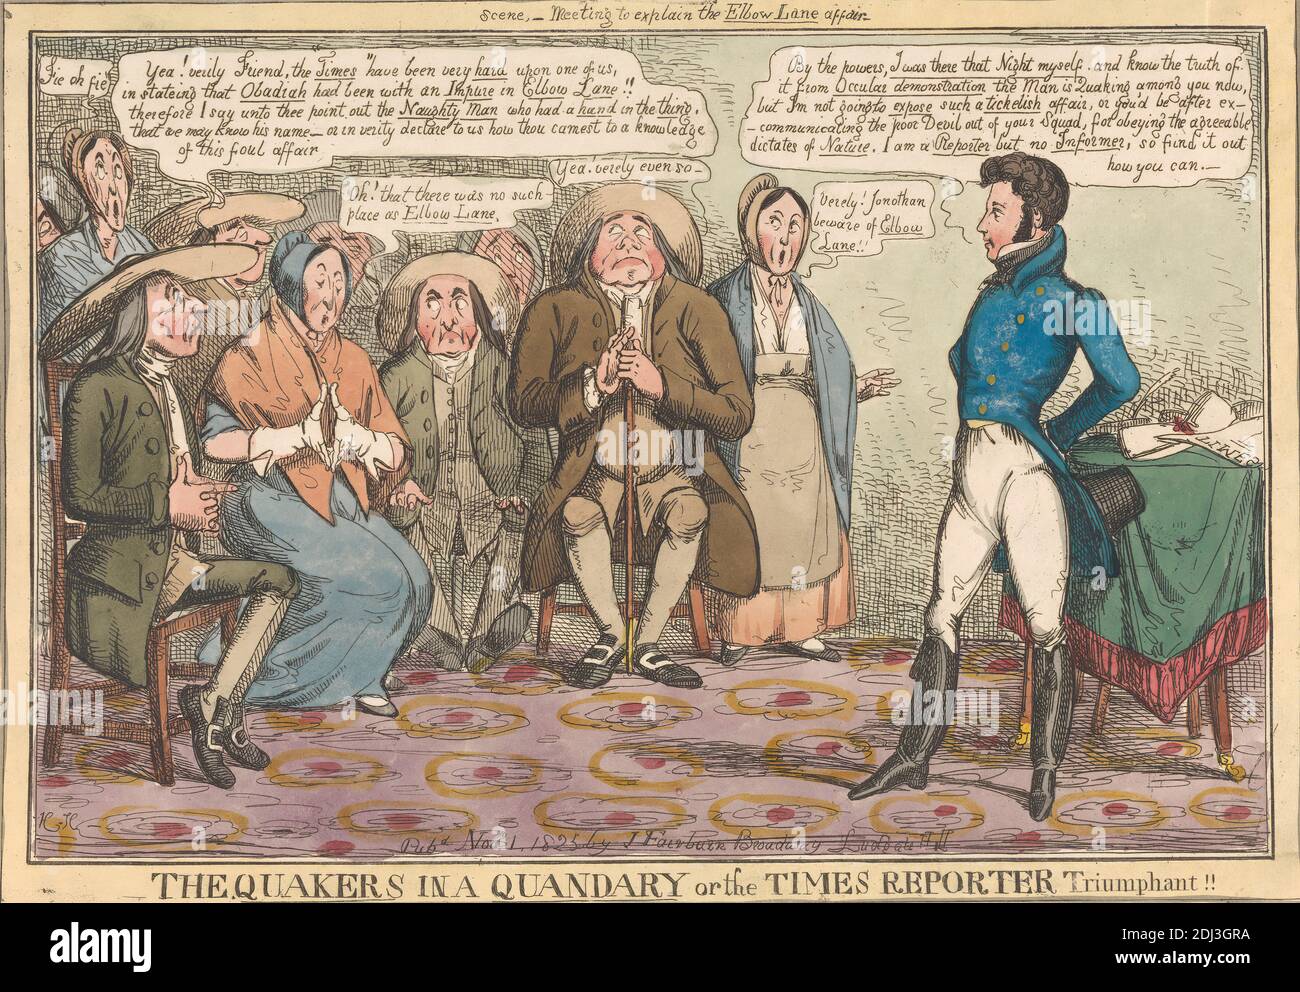 The Quakers in a Quandary or the Times Reporter Triumphant!!, Henry Heath, active 1824–1835, British, 1825, Etching, hand-colored, Sheet: 8 1/2 x 12 3/4in. (21.6 x 32.4cm Stock Photo